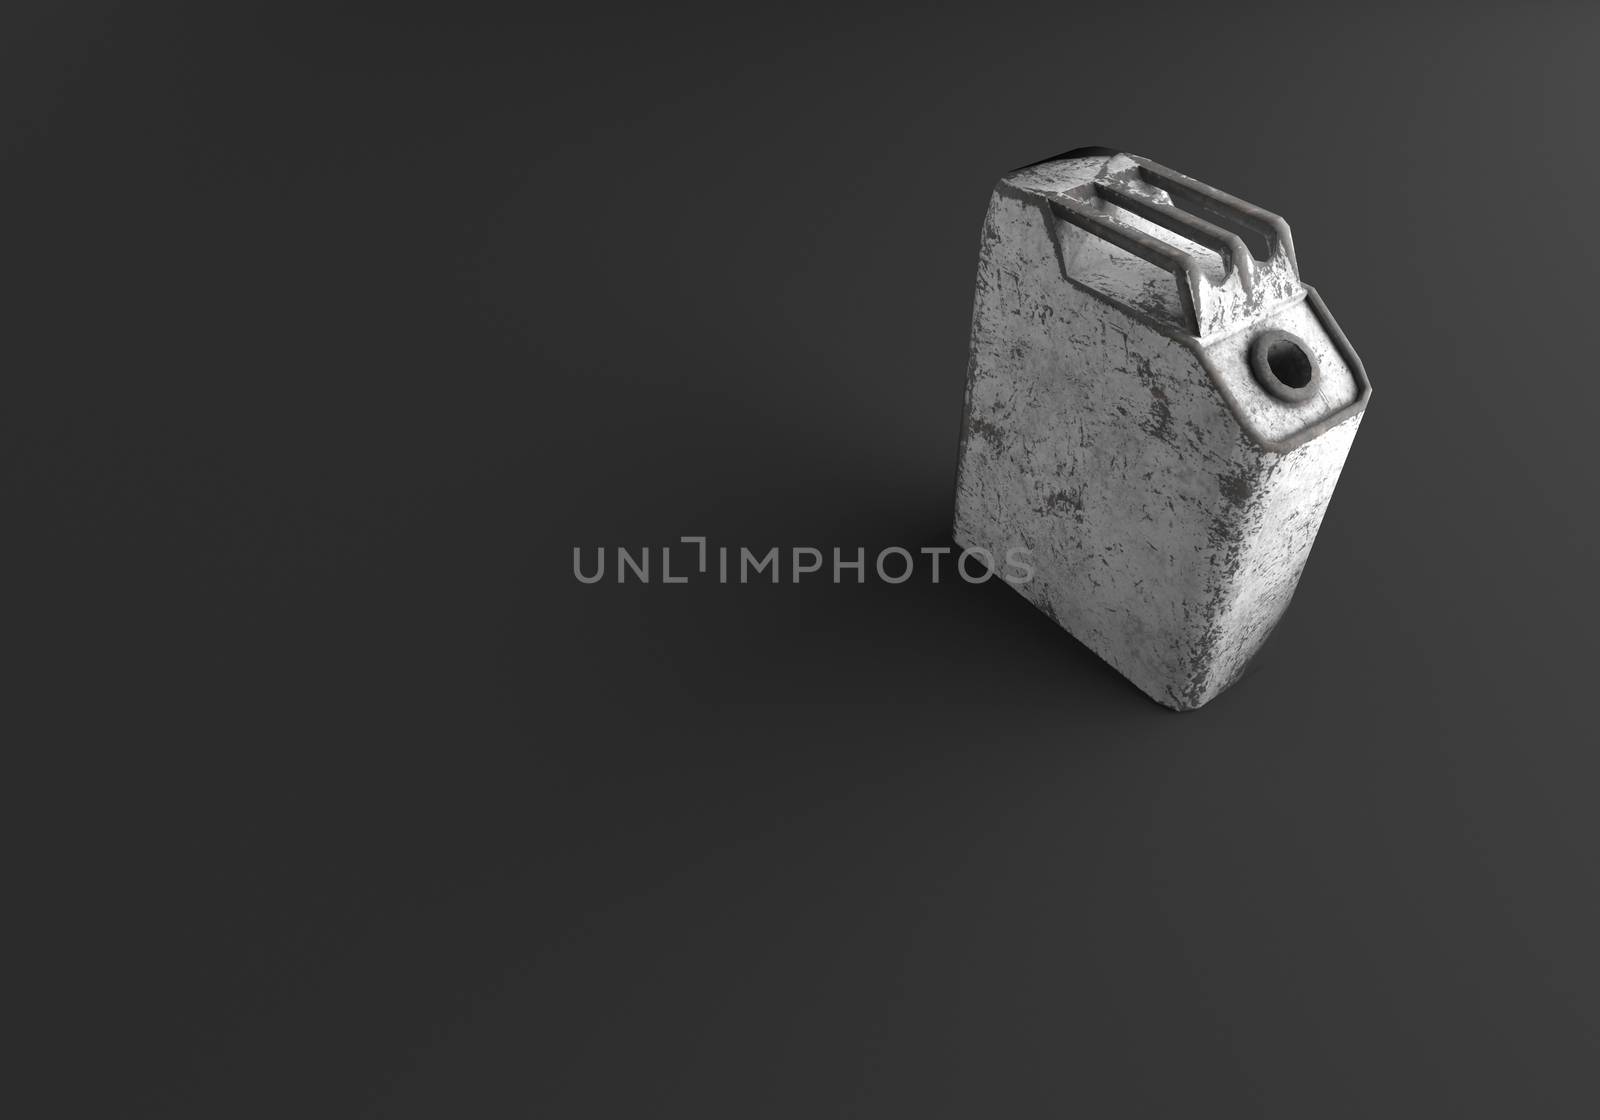 3D RENDERING OF OLD RUSTIC METAL CANISTER ON PLAIN BLACK BACKGROUND